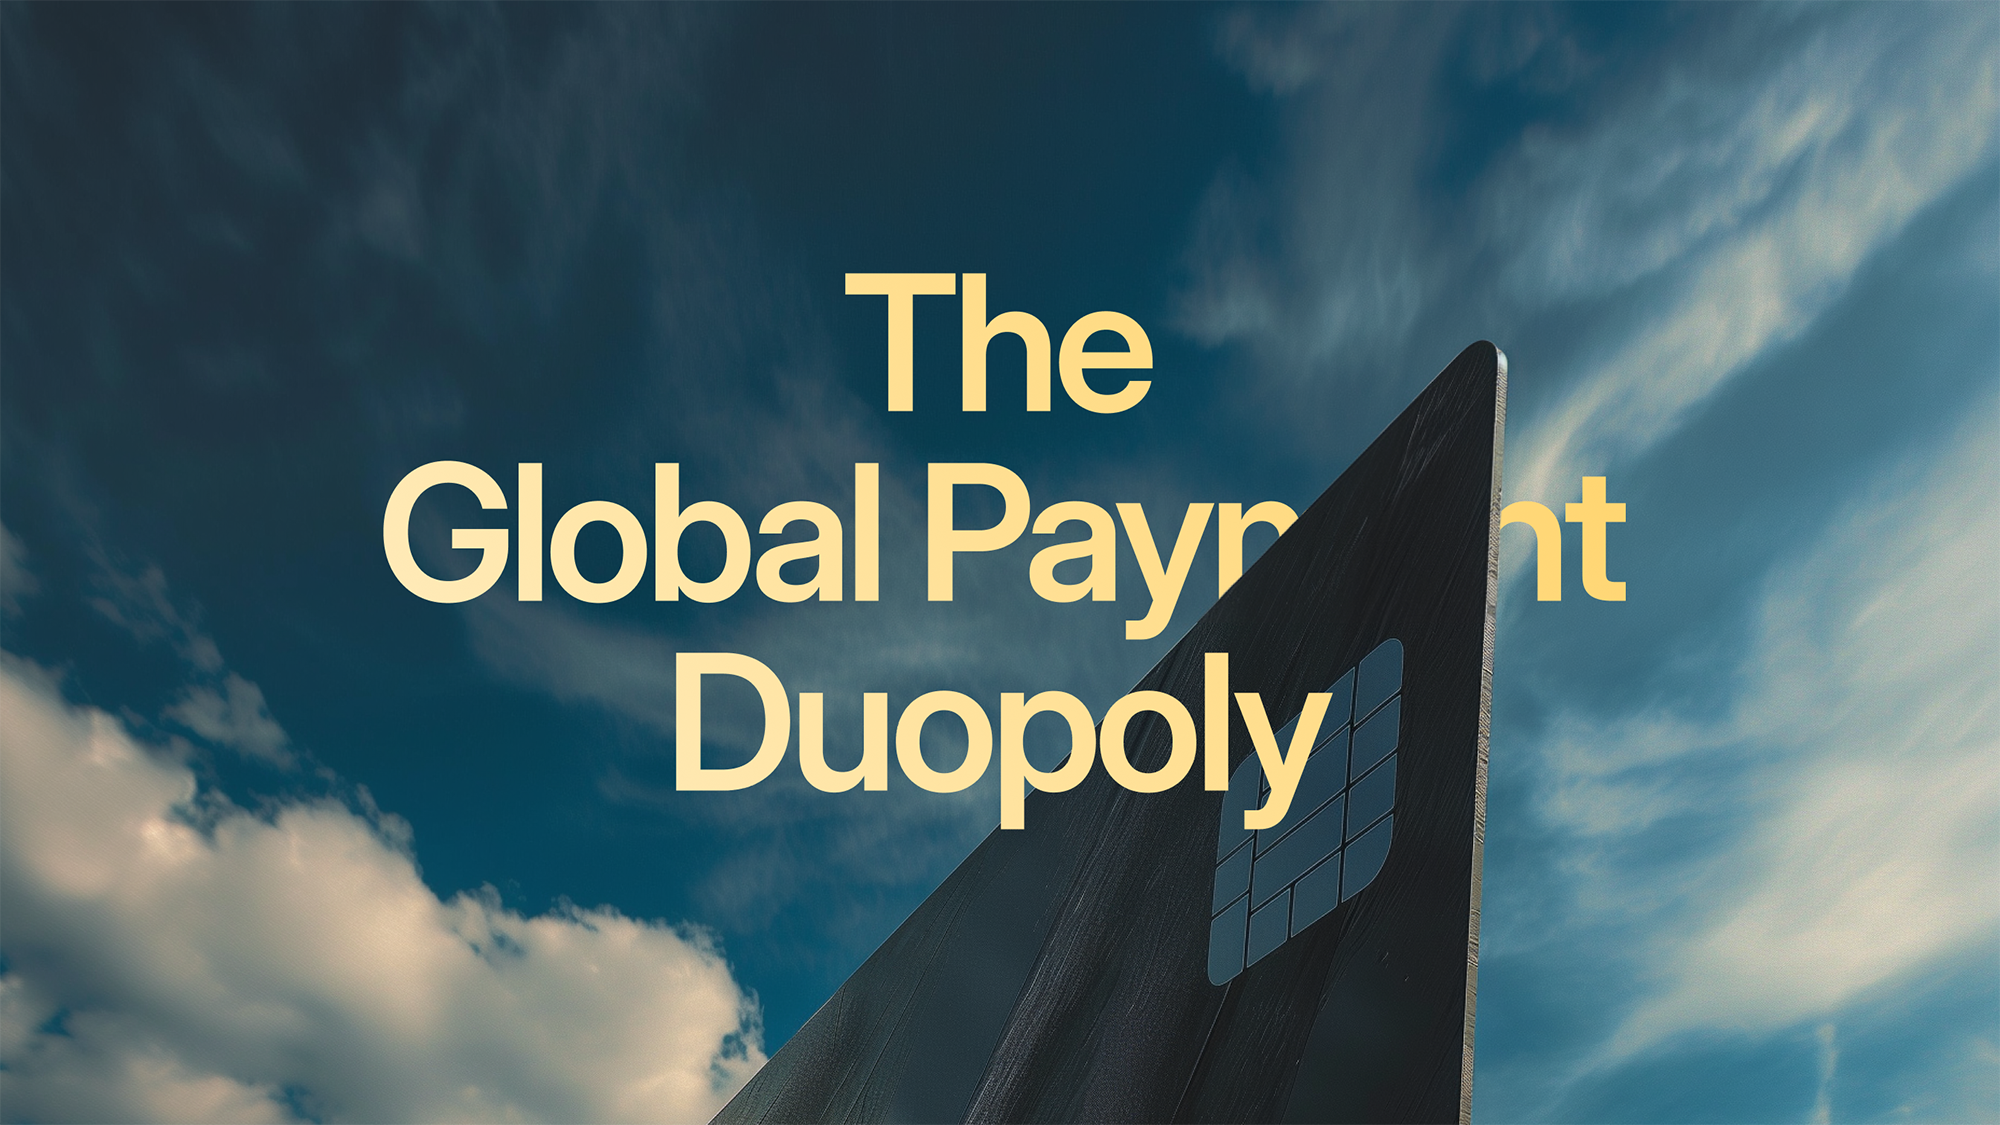 Visa and Mastercard: The Global Payment Duopoly